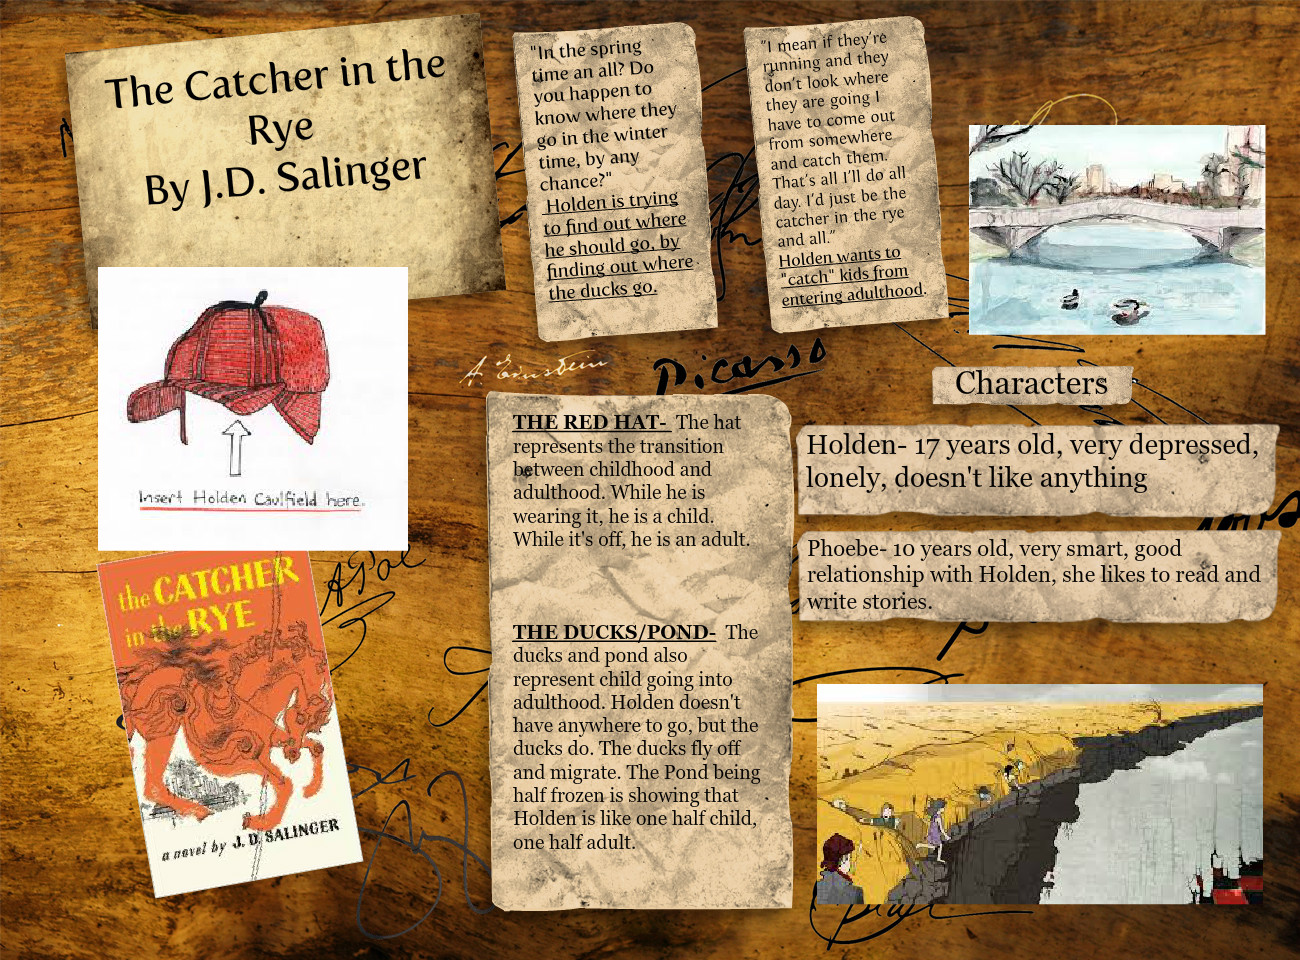 Who wrote the book “The Catcher In The Rye” and when?